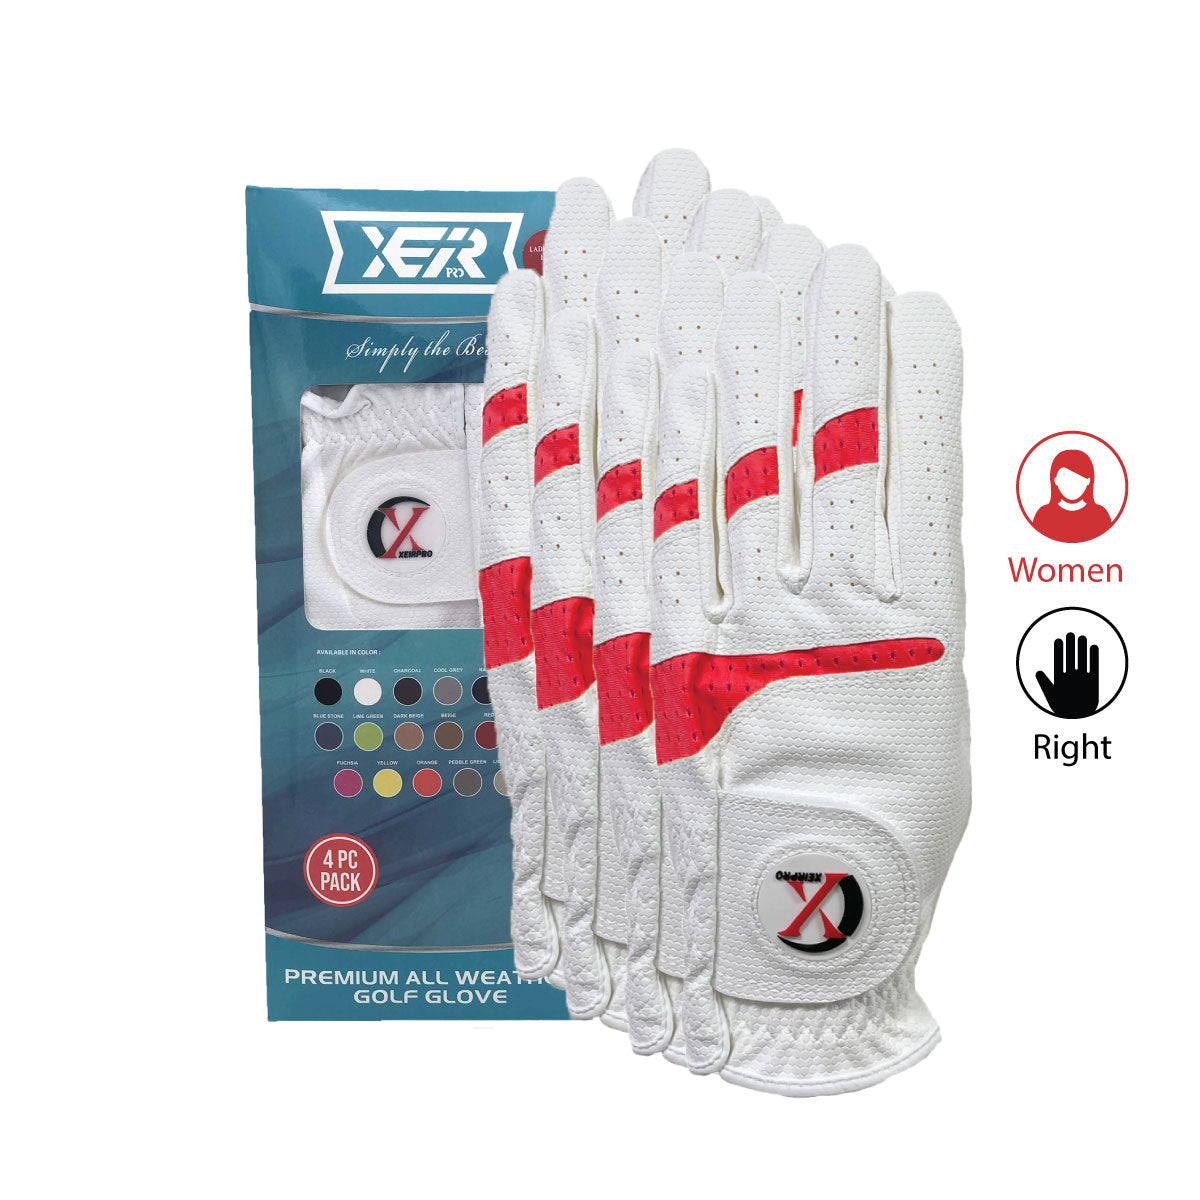 XEIR PRO Premium All Weather Golf Gloves 4 Pack for Women Worn On Right Hand for Left Handed Golfer